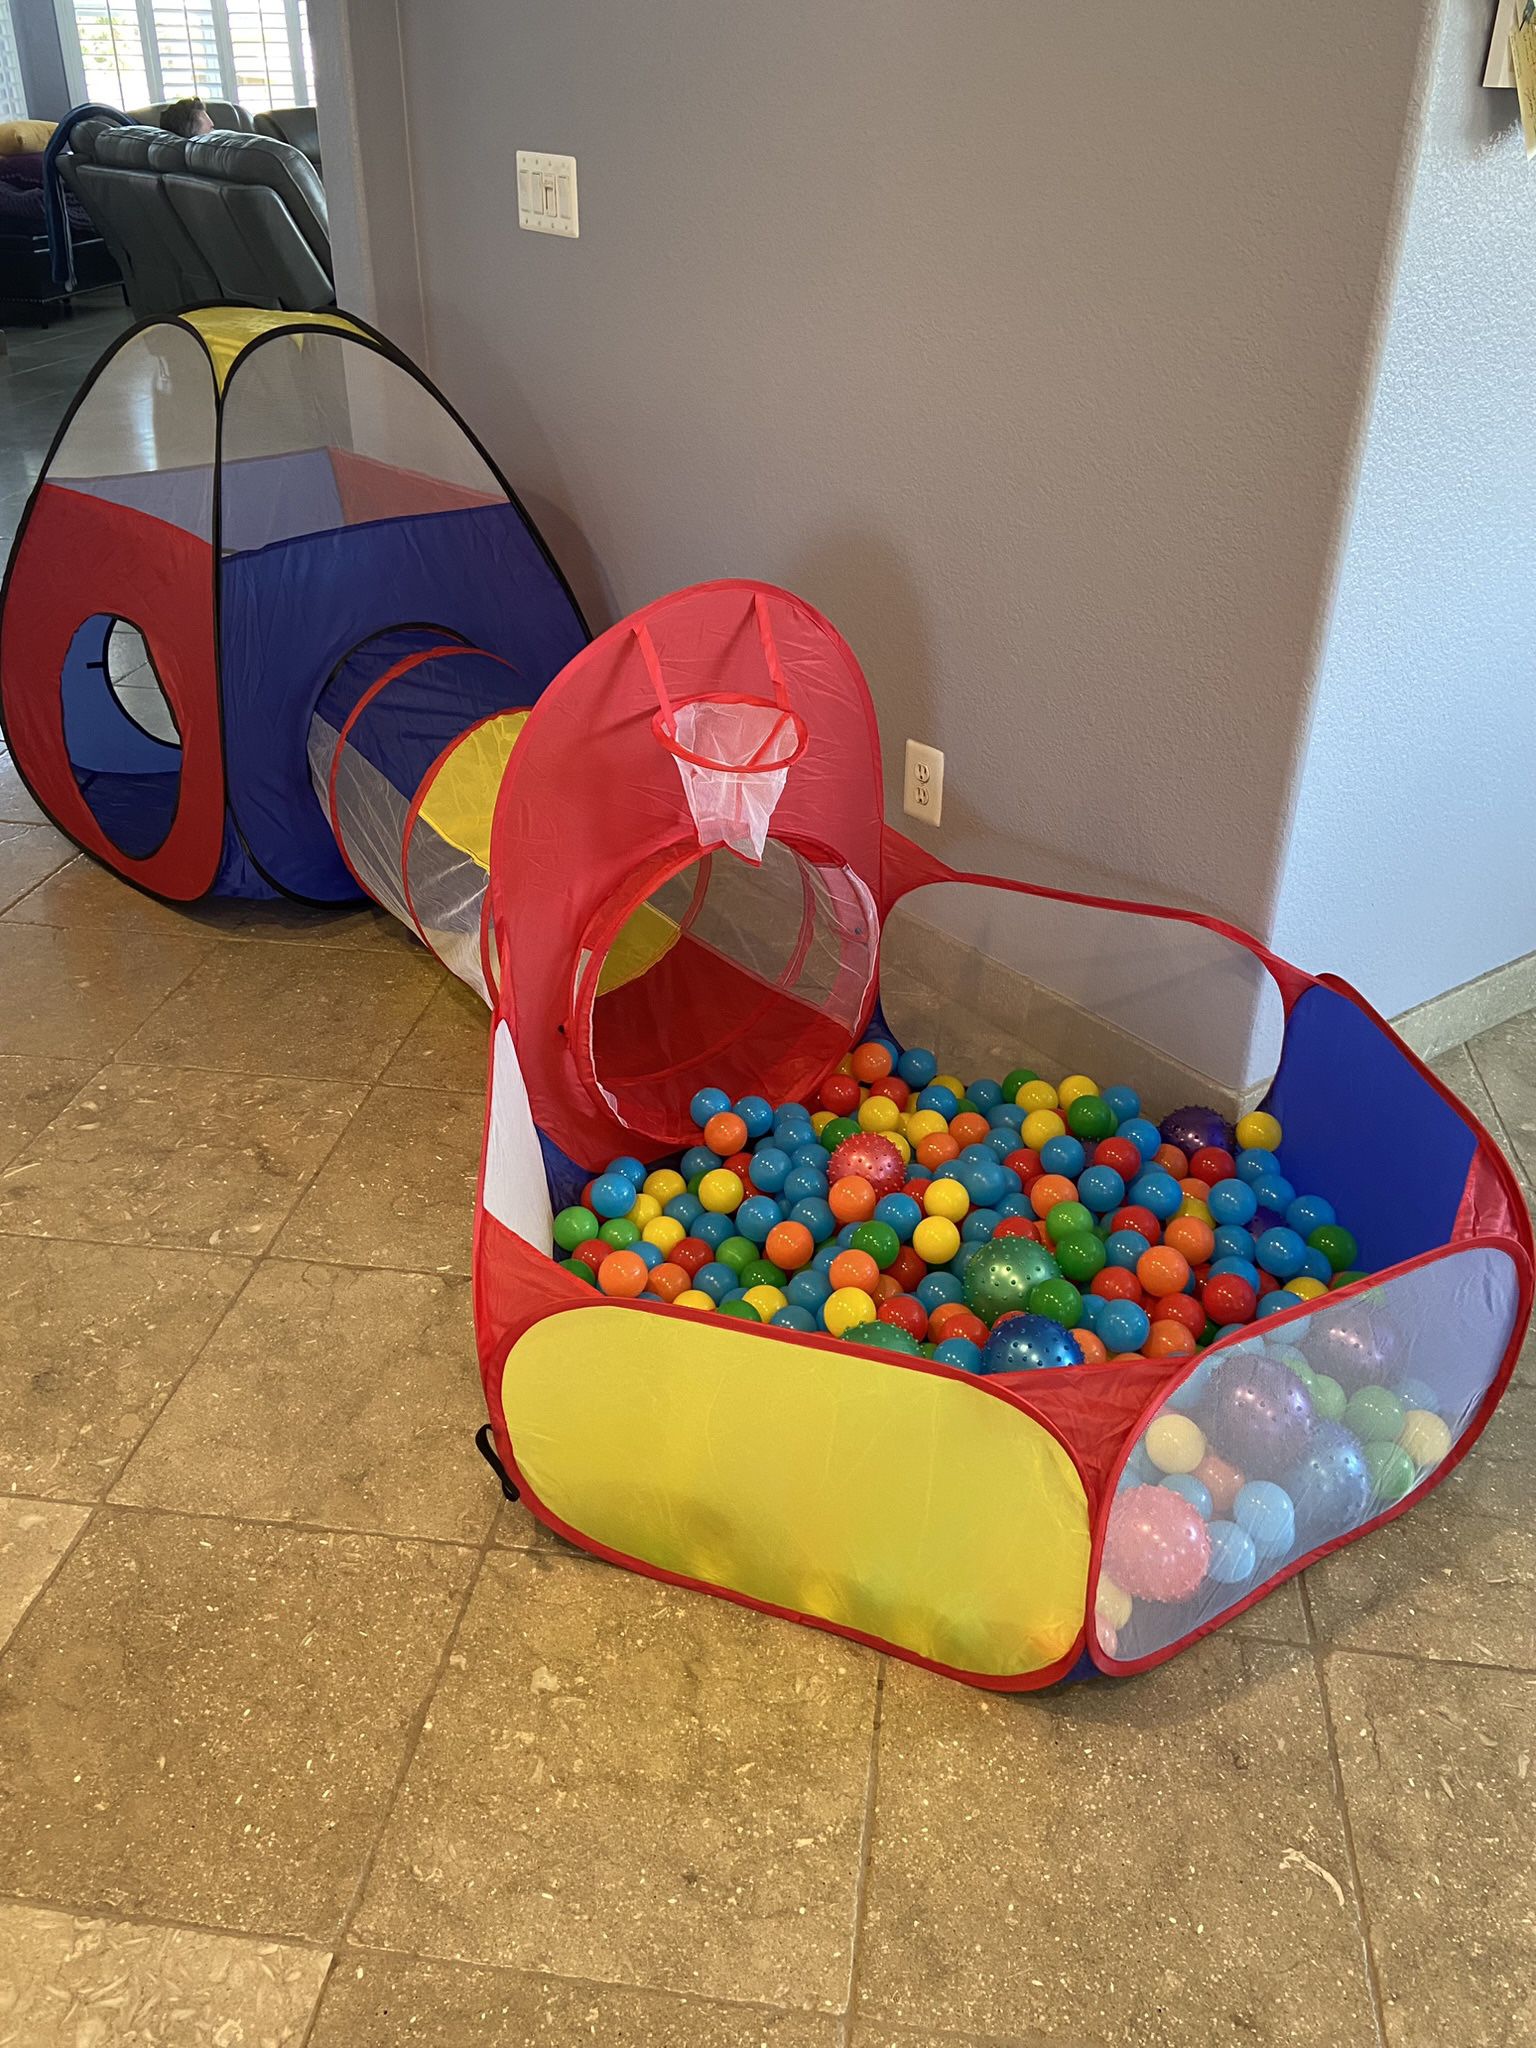 3 in 1 Kids Play Tent/Ball Pit  with 200+ balls and 2 IKEA storage baskets